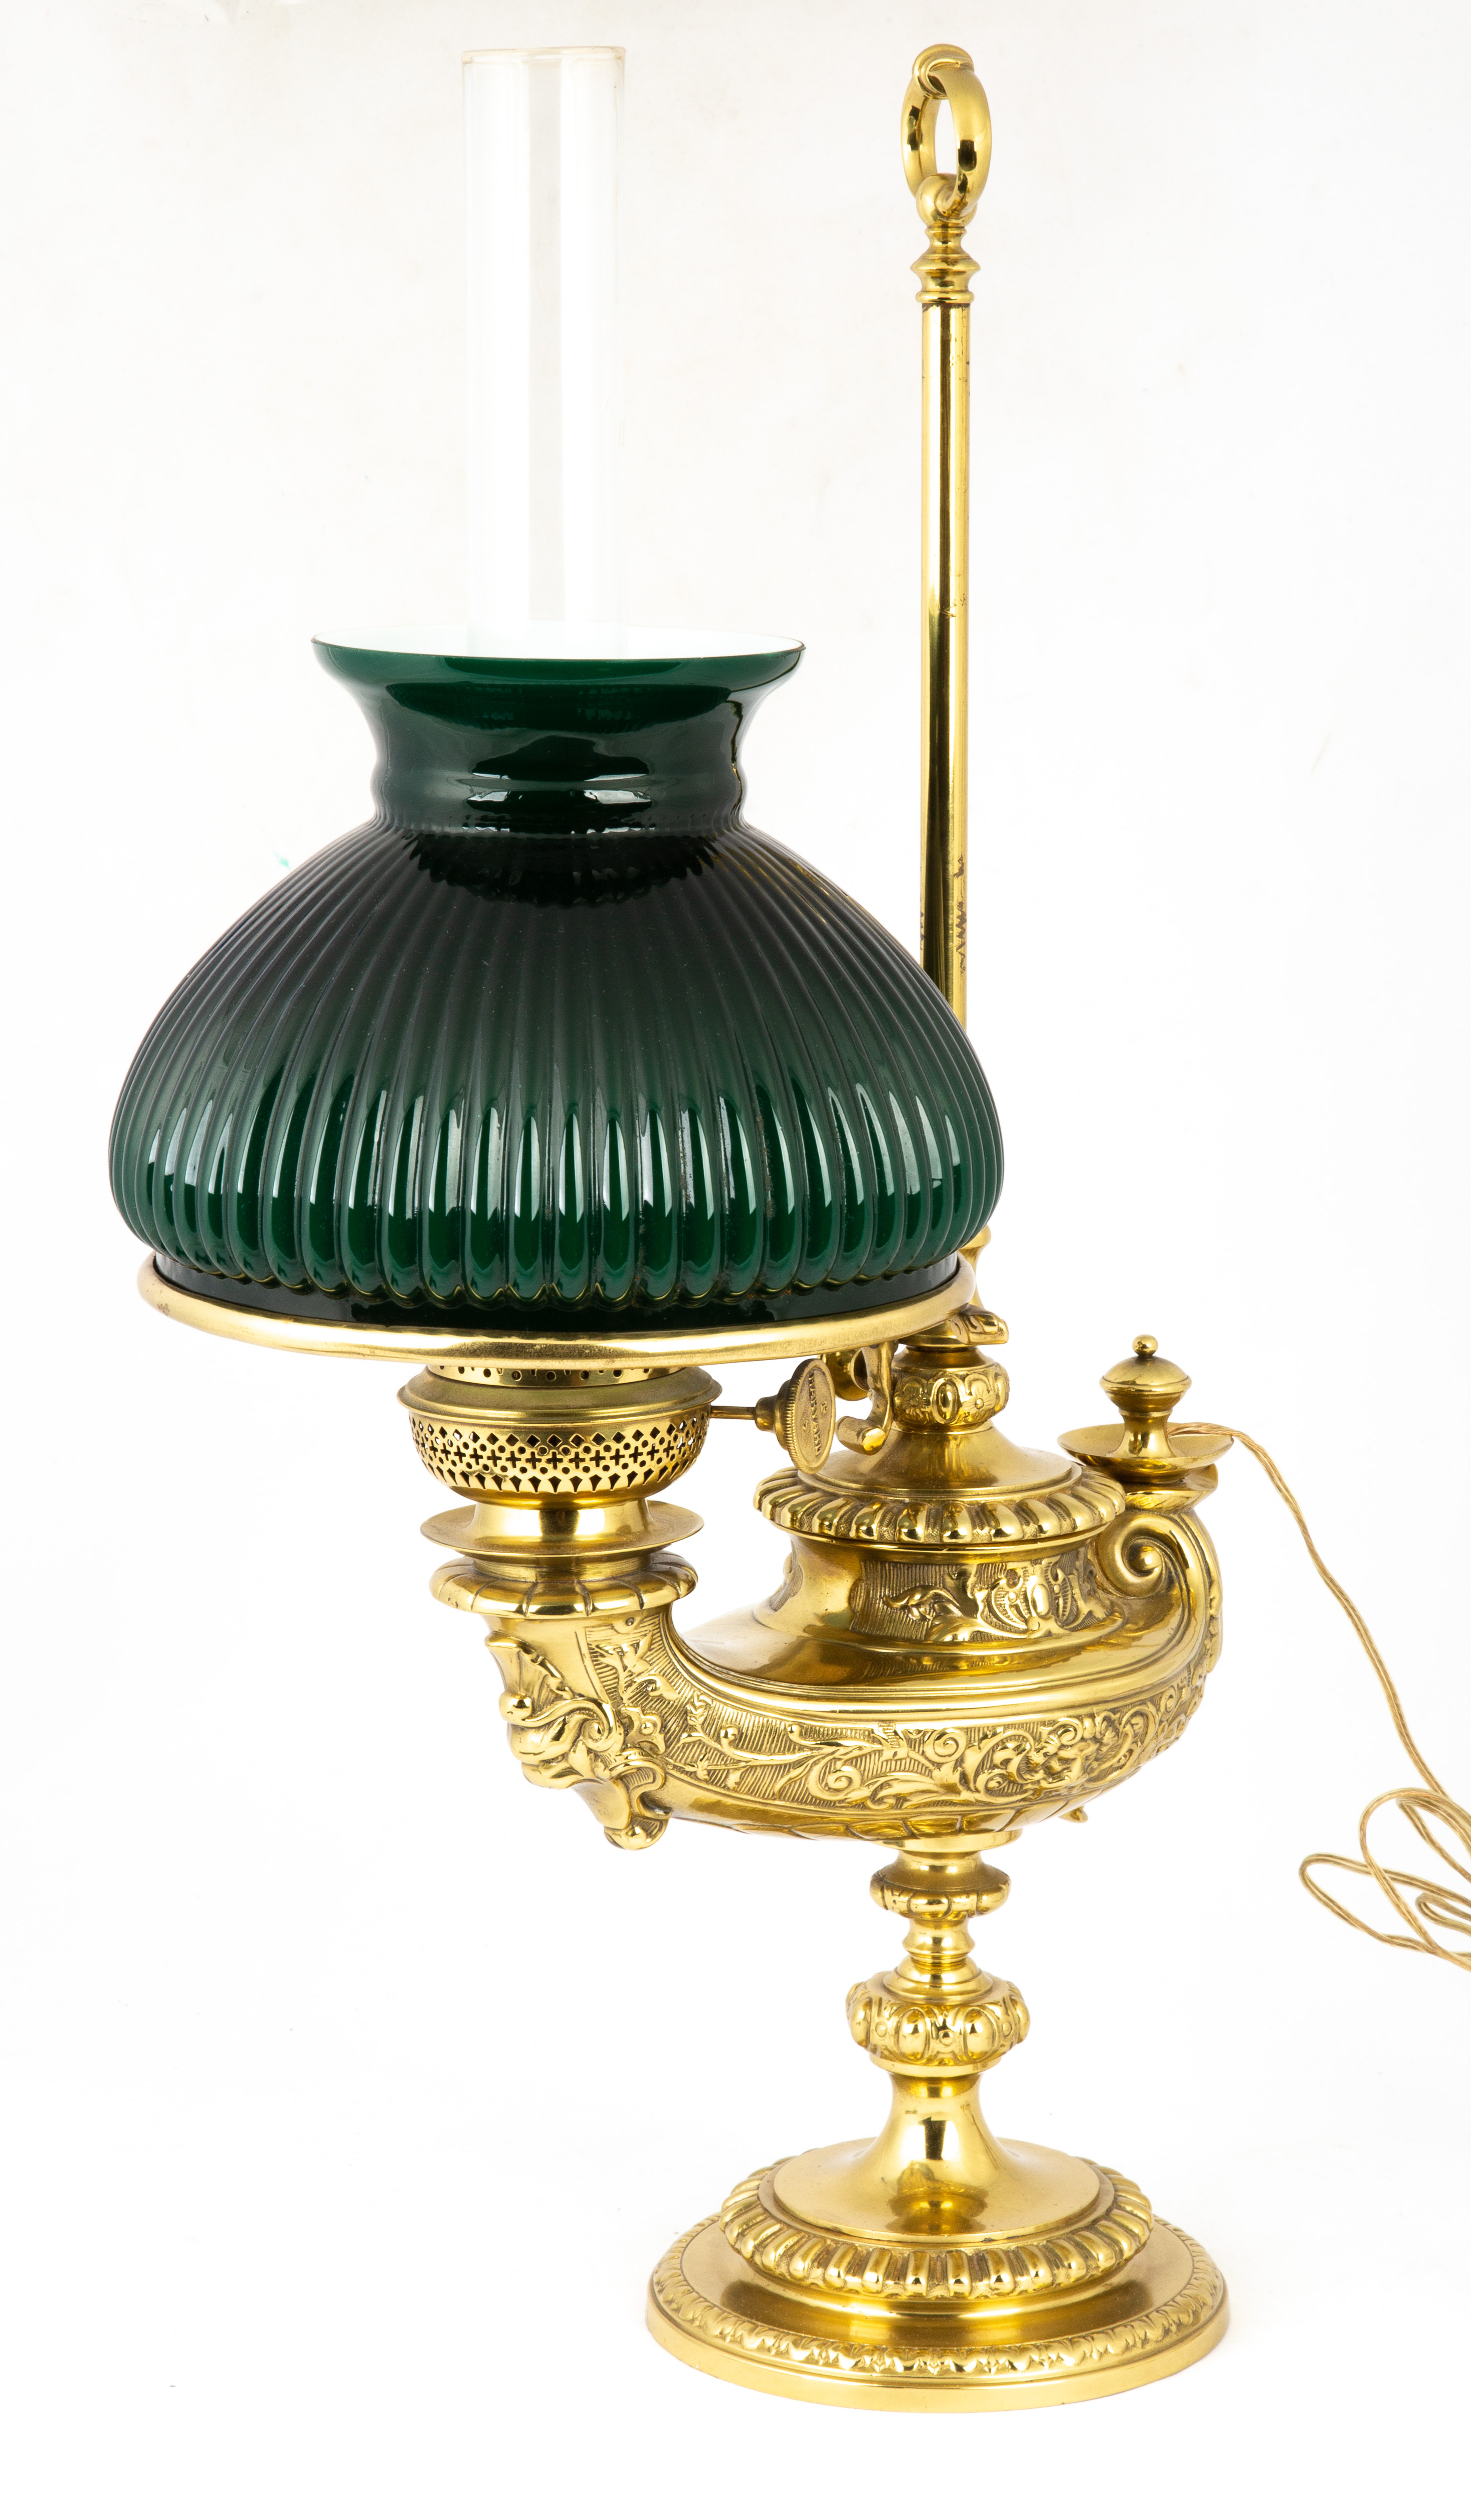 HARVARD STUDENT LAMP The Plume & Atwood